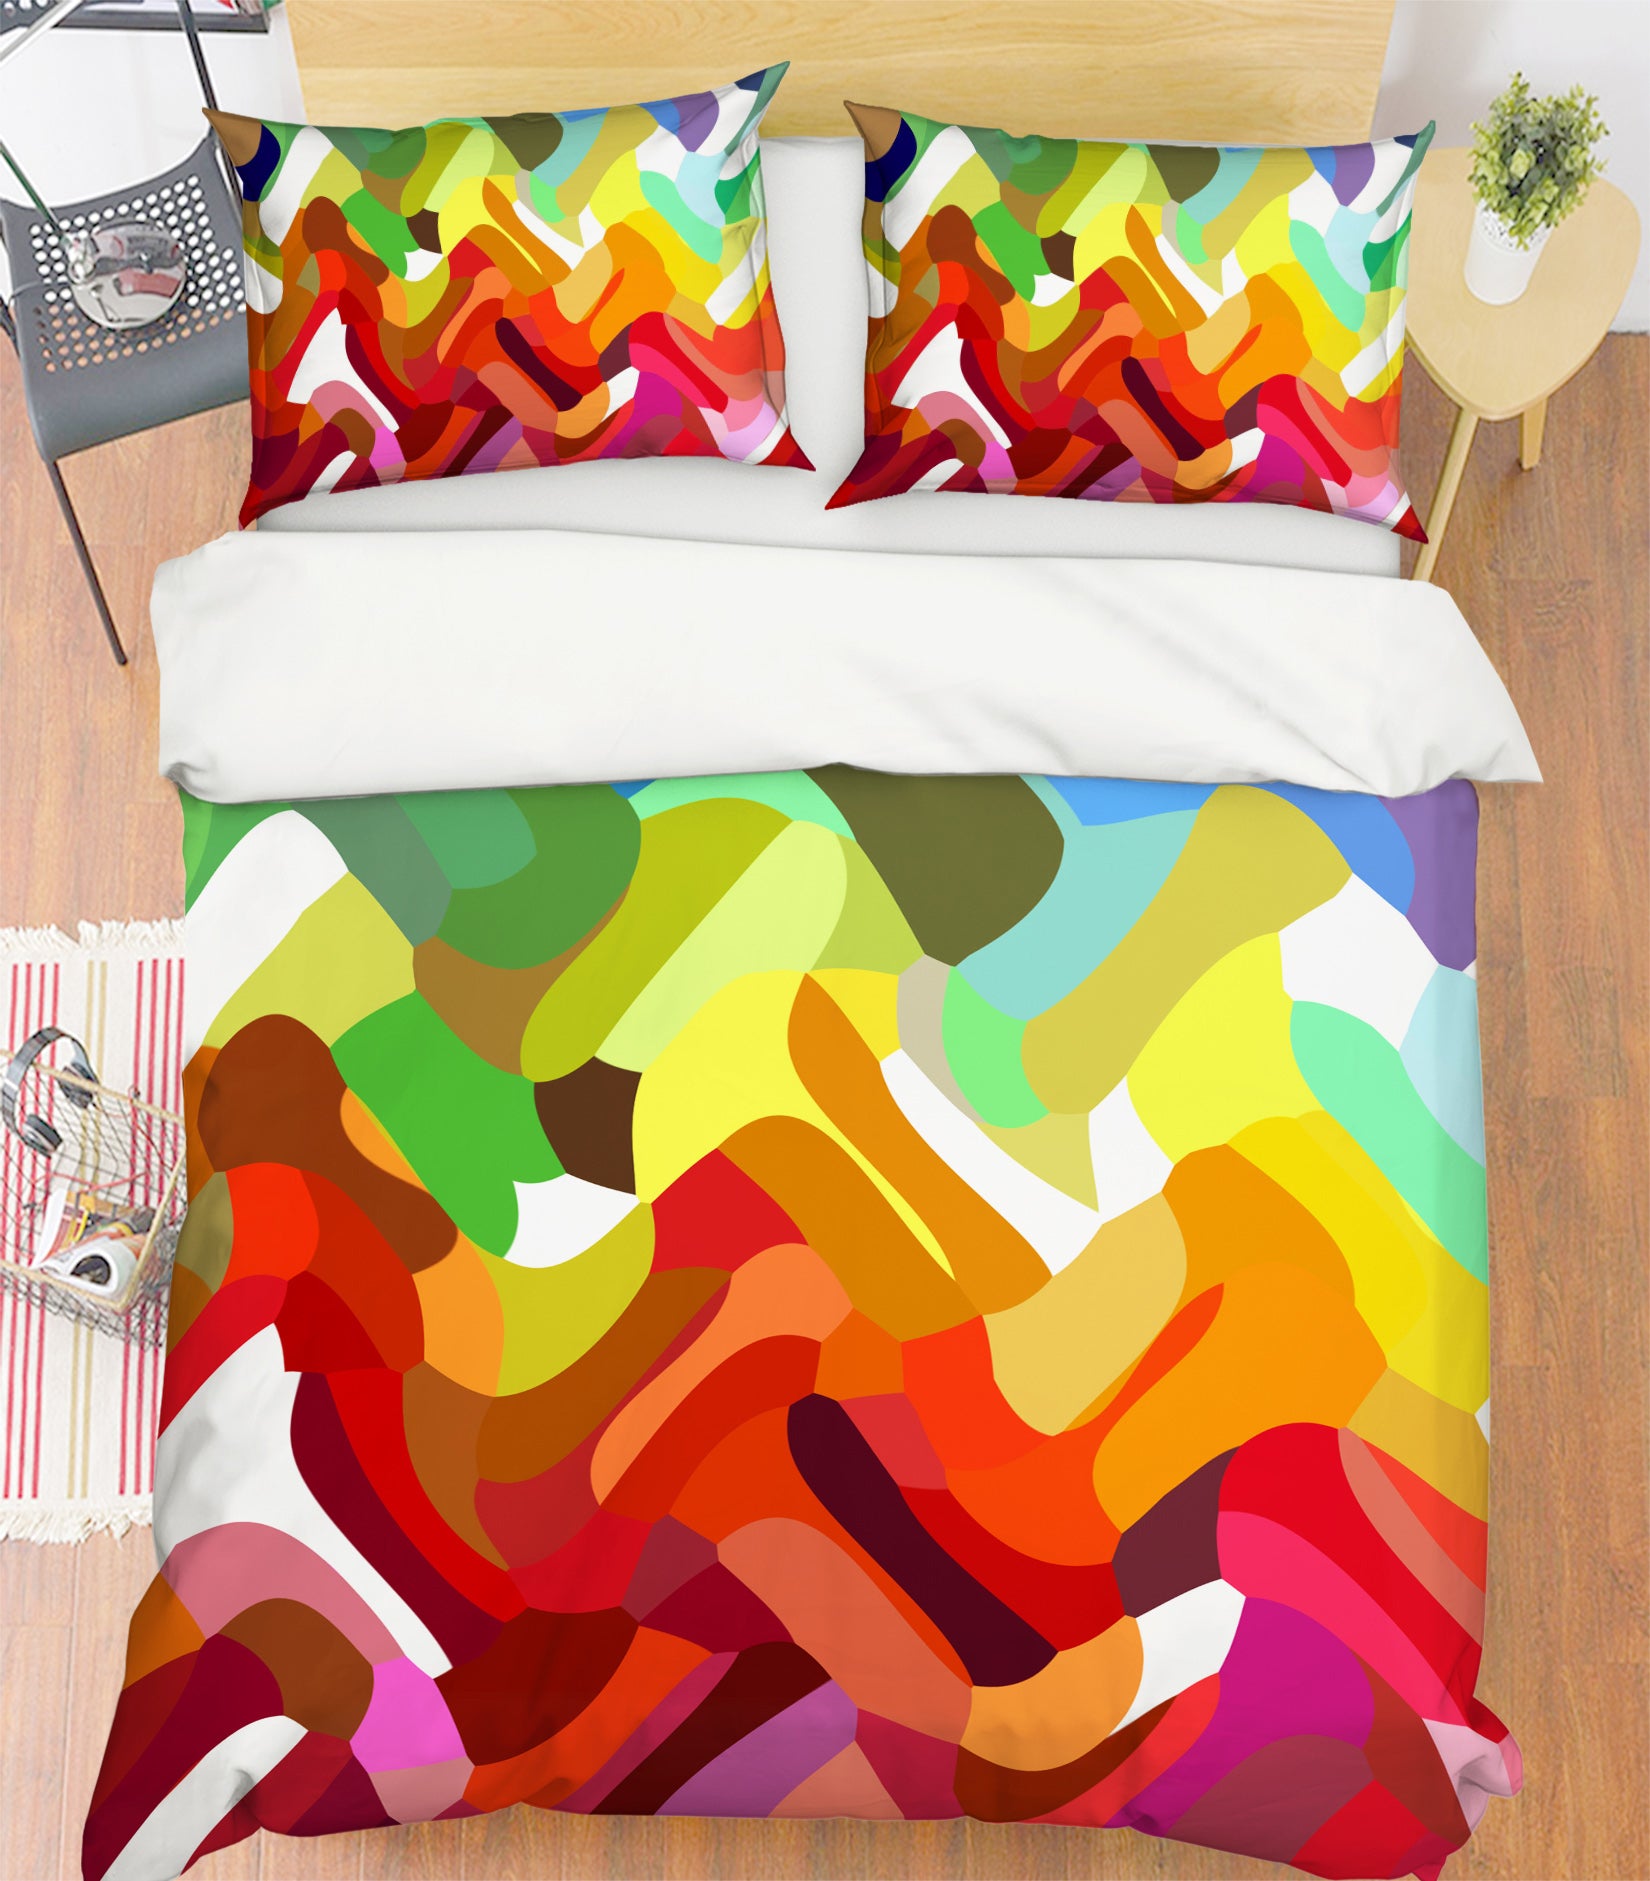 3D Color Pattern 19130 Shandra Smith Bedding Bed Pillowcases Quilt